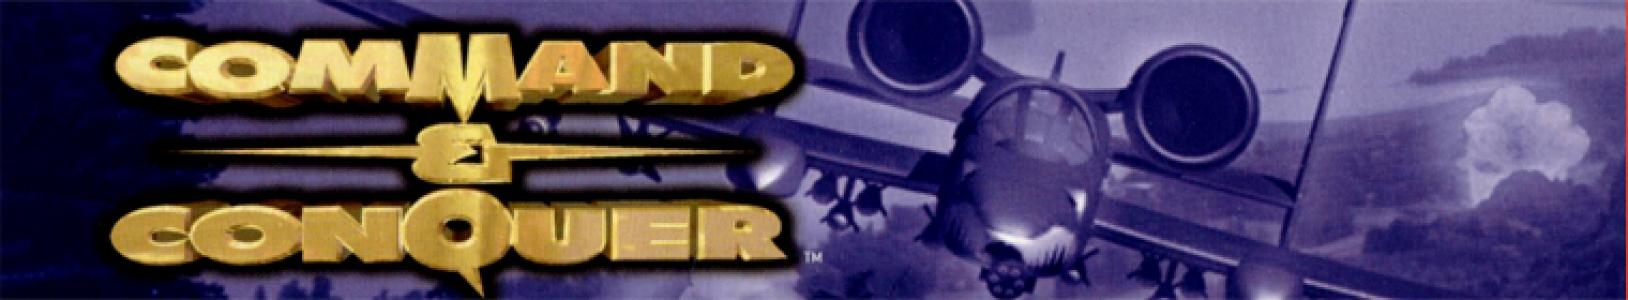 Command & Conquer banner